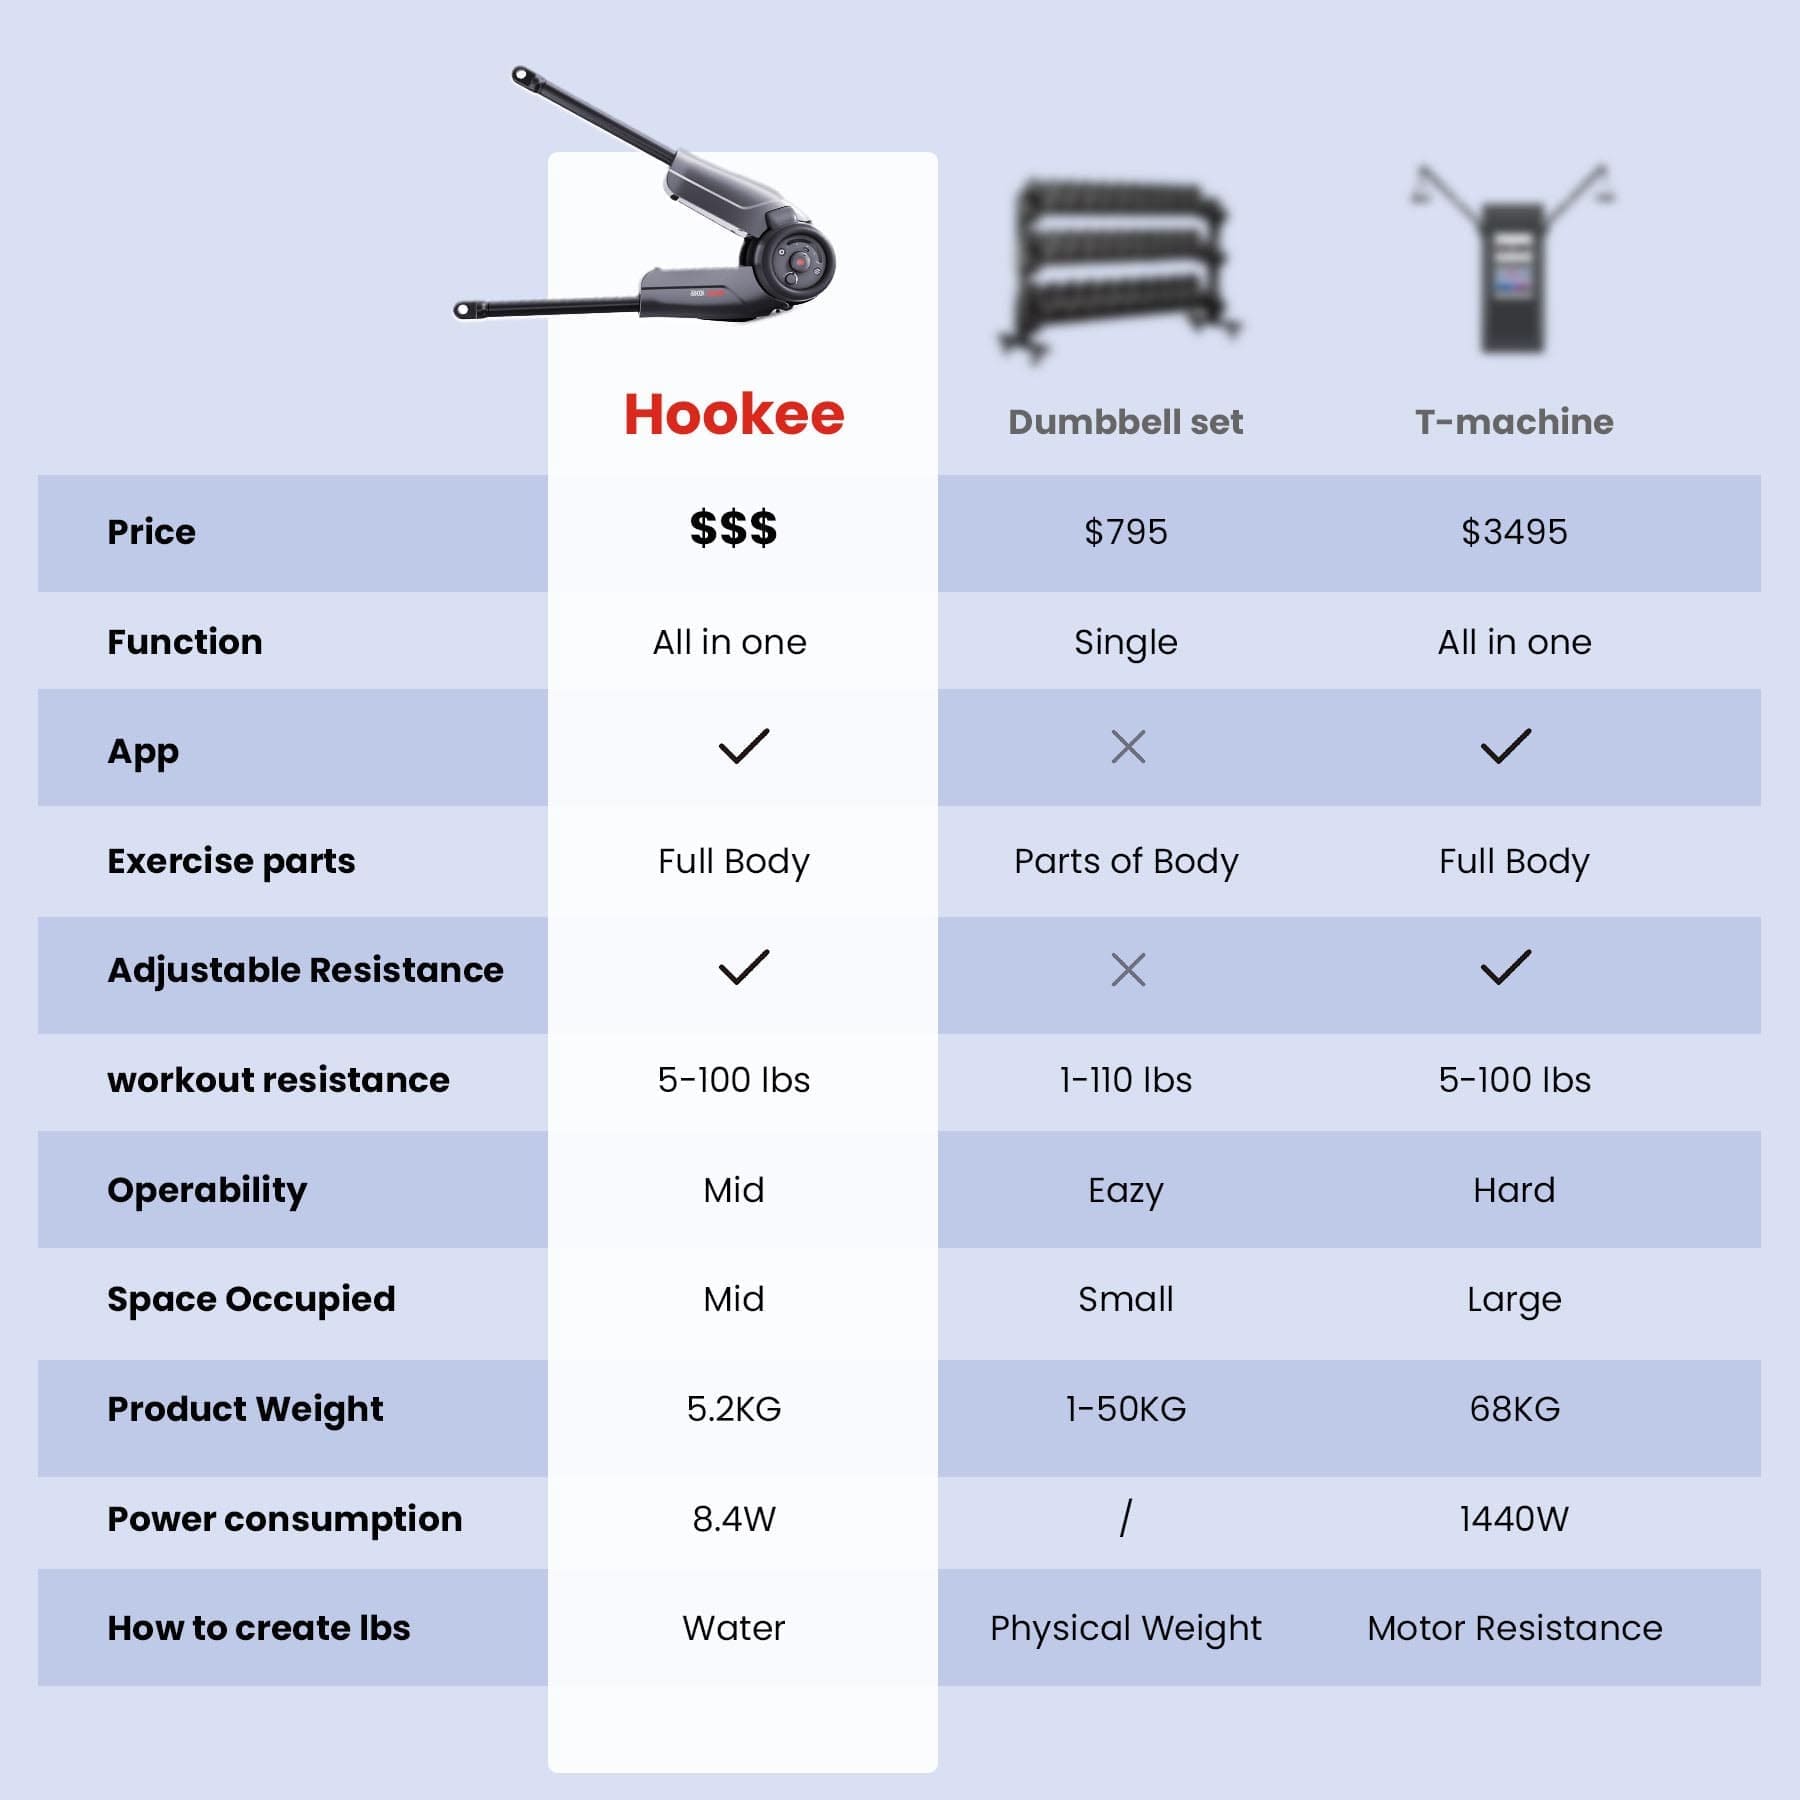 Comparison between Hookee and other products